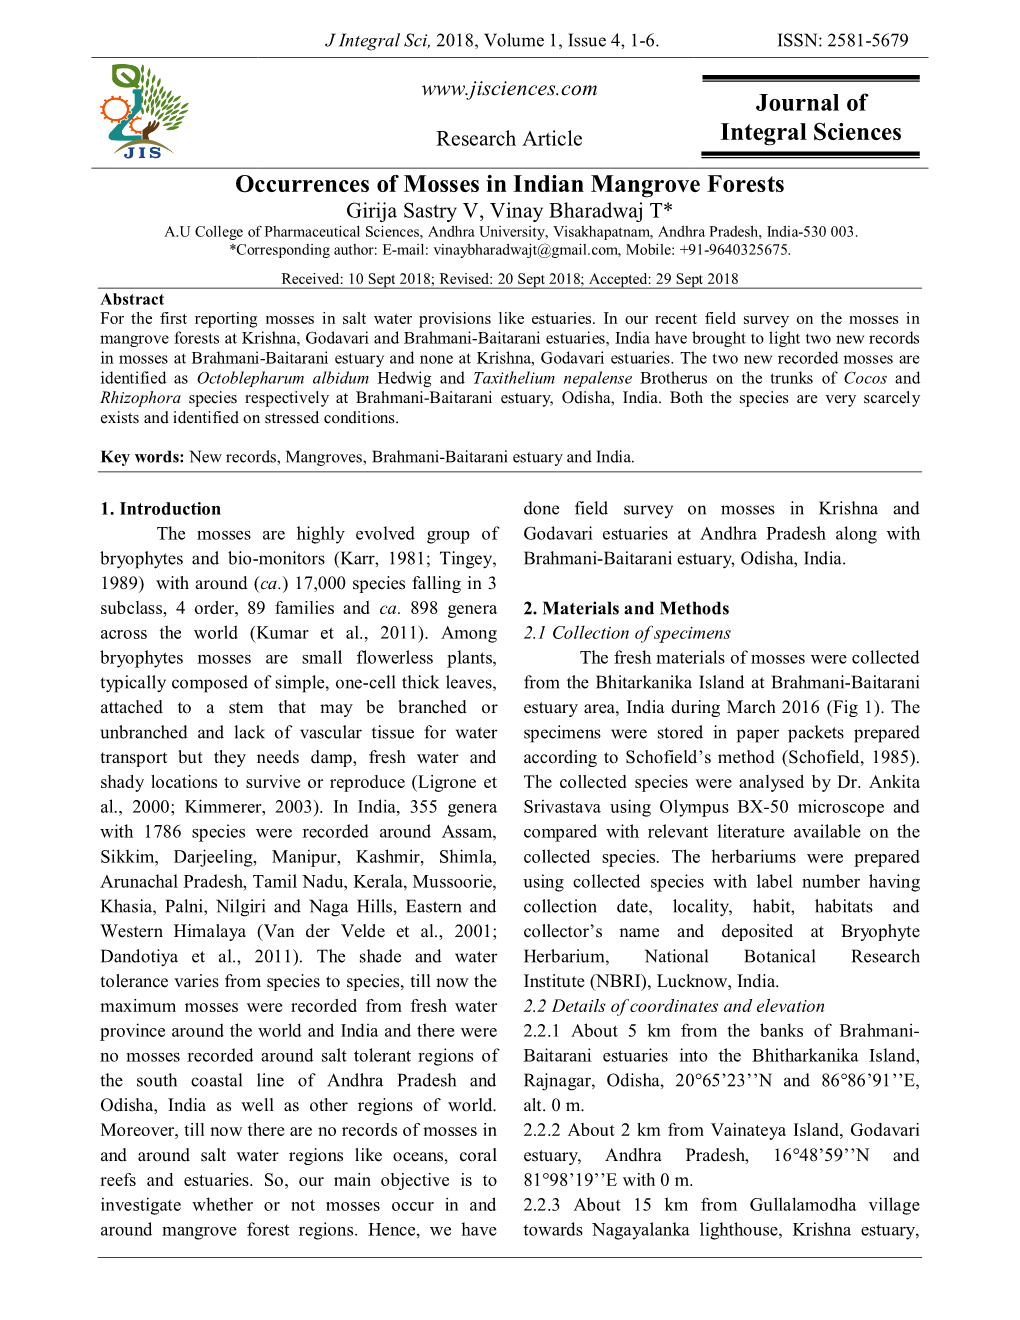 Journal of Integral Sciences Occurrences of Mosses in Indian